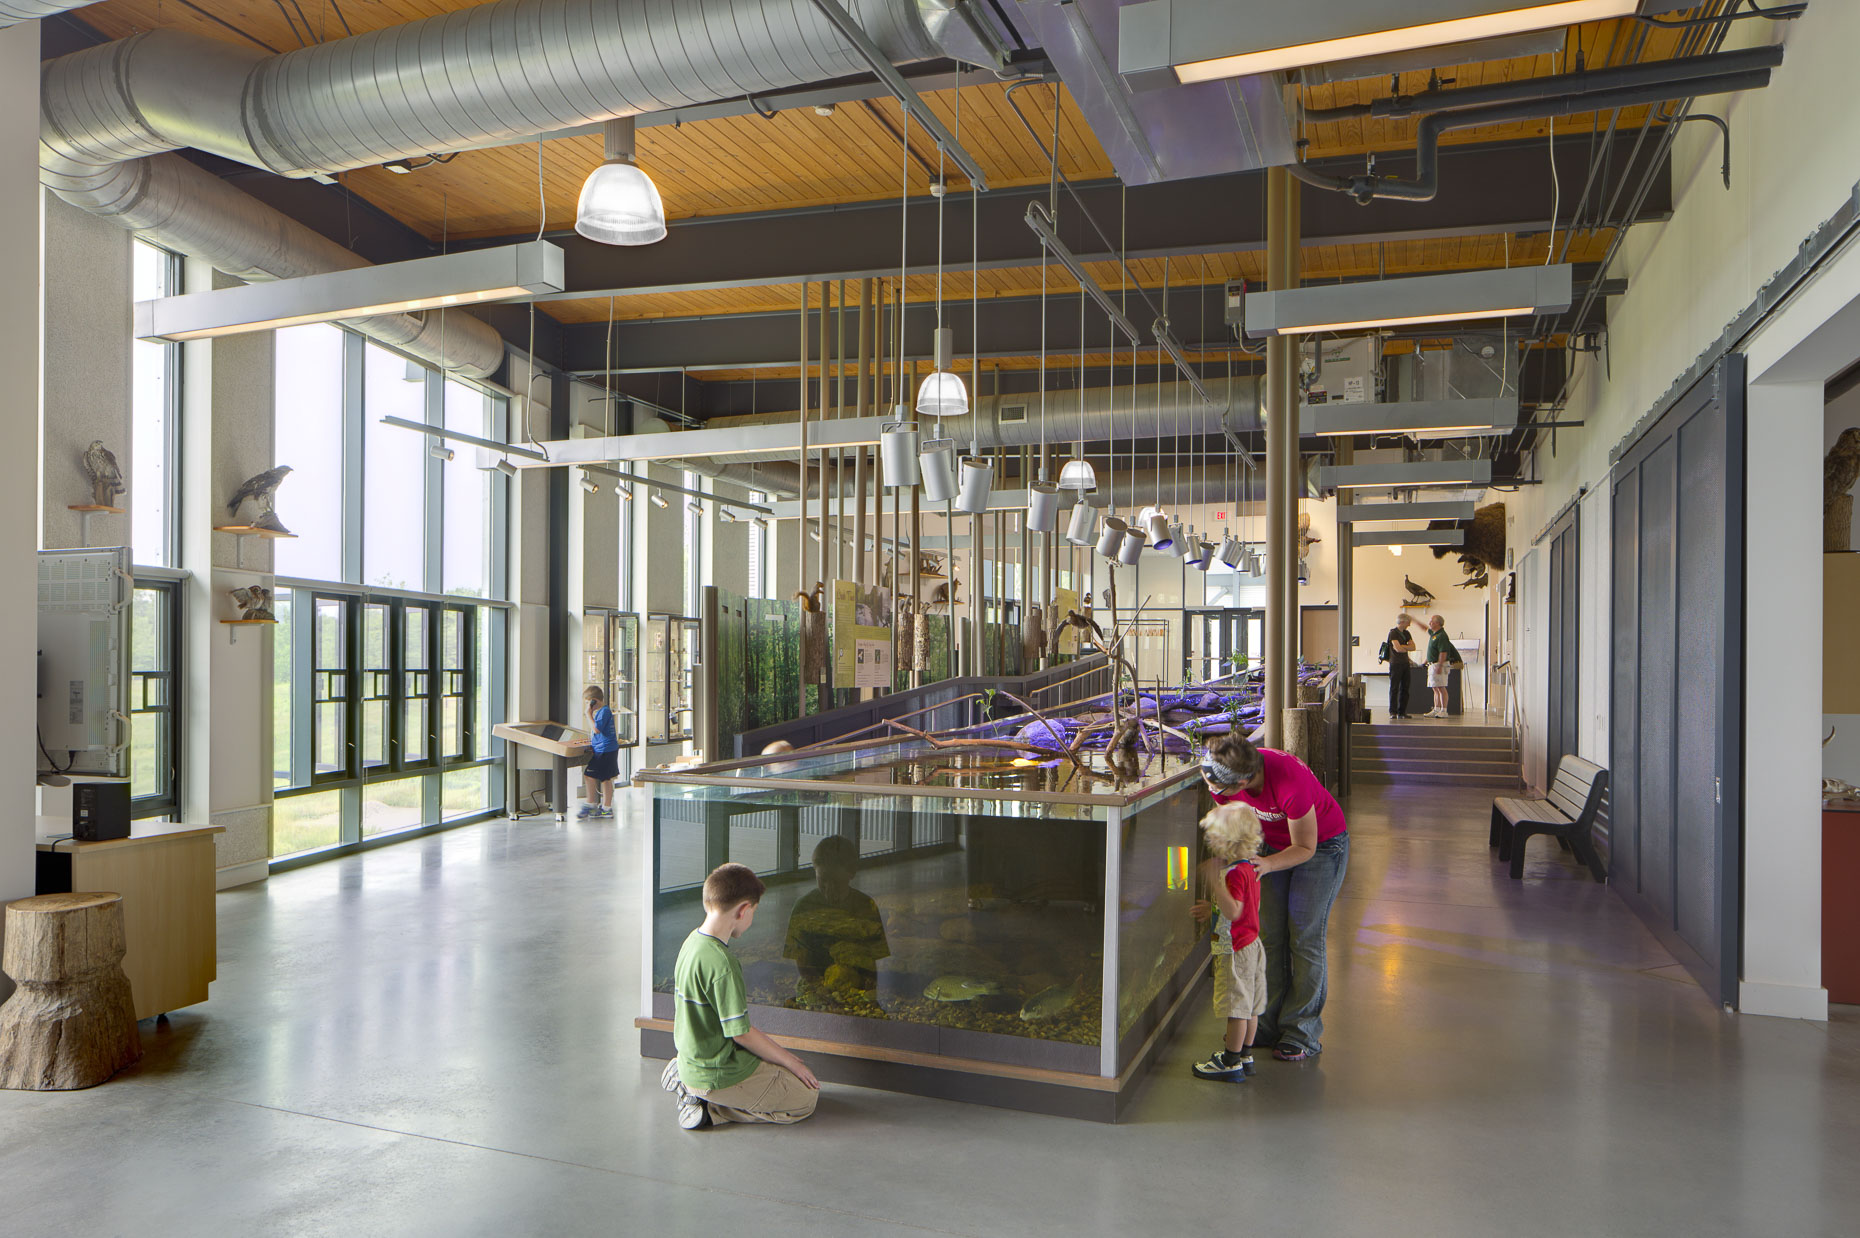 Battelle-Darby Creek Nature Center by DesignGroup photographed by BRad Feinknopf based in Columbus, Ohio